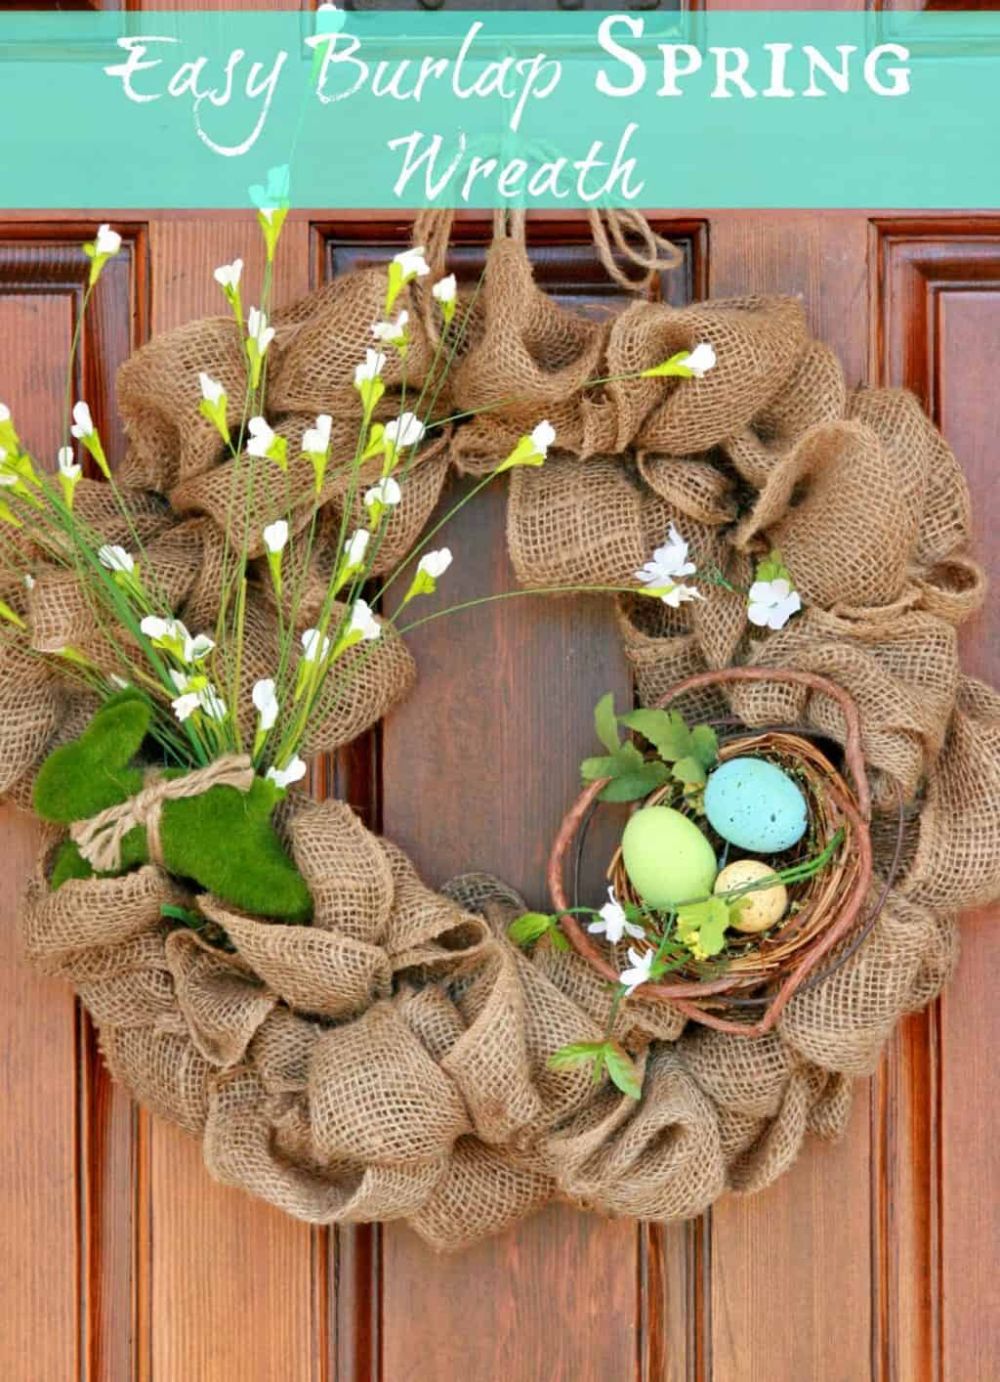 How to Make an Easter Wreath using Burlap